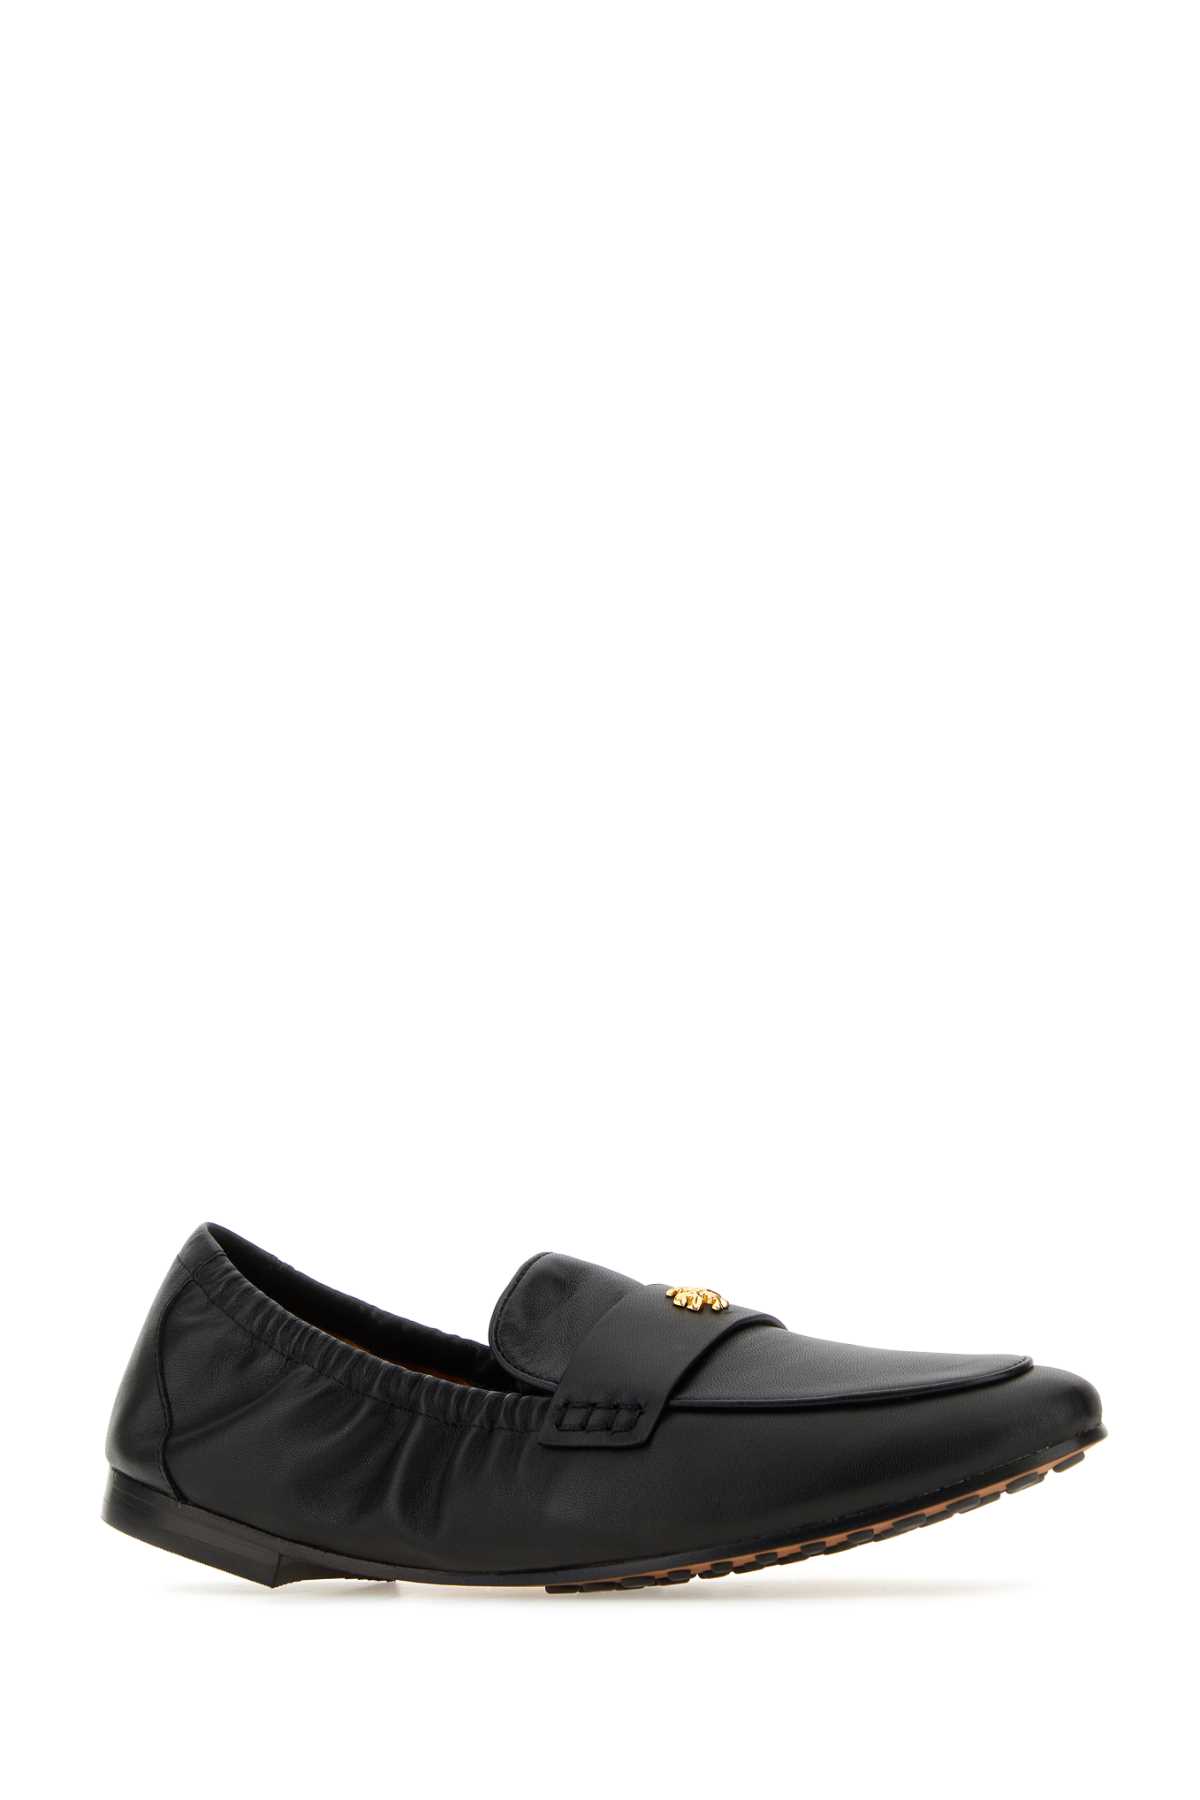 Tory Burch Black Leather Ballet Loafers In Perfectblack